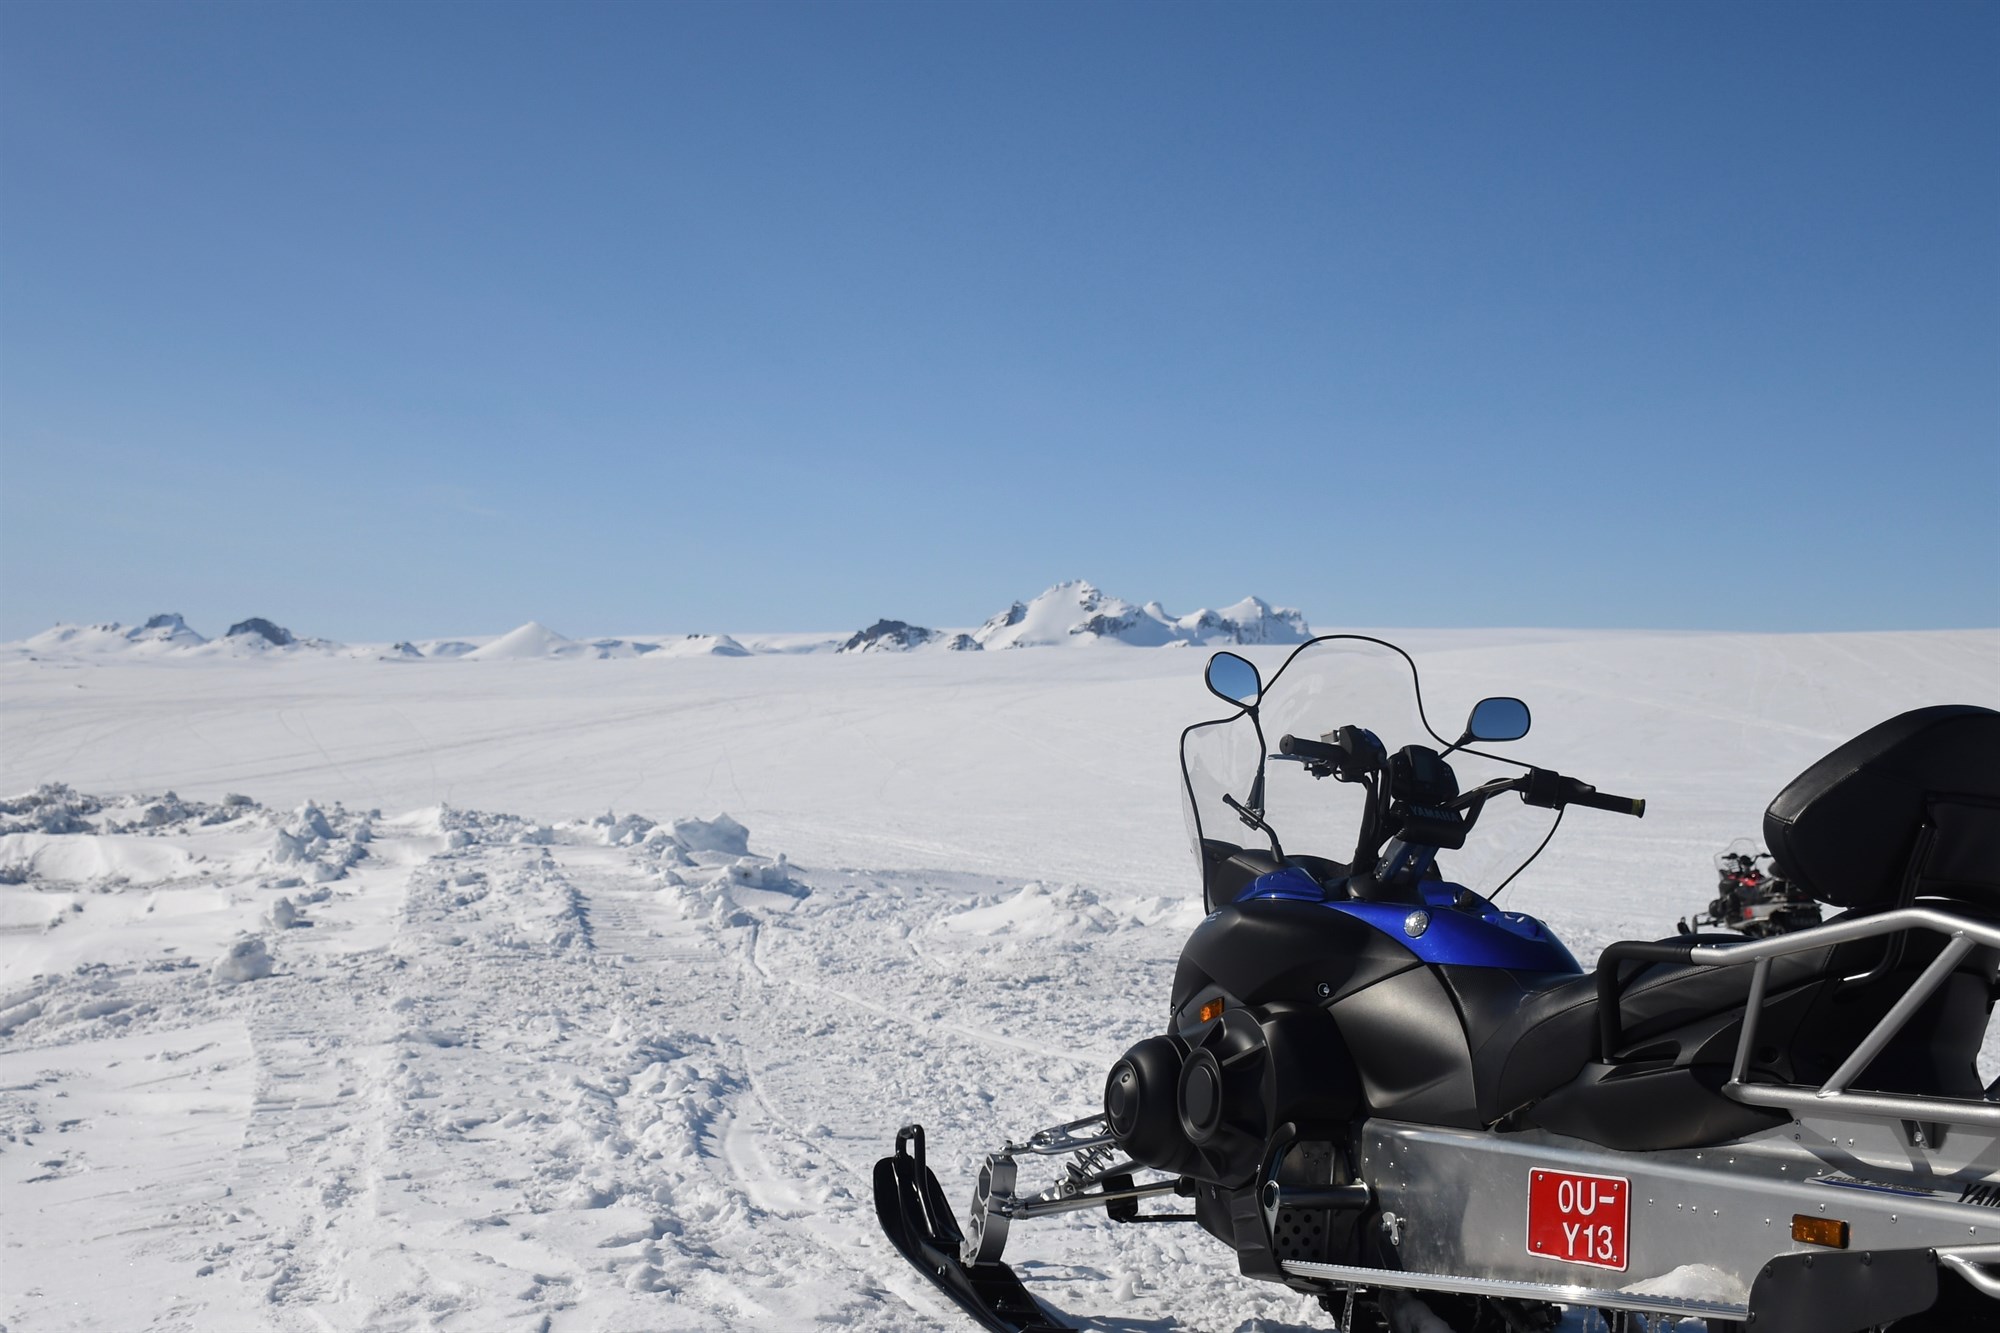  Snowmobile on Iceland snow with blue skies overhead.